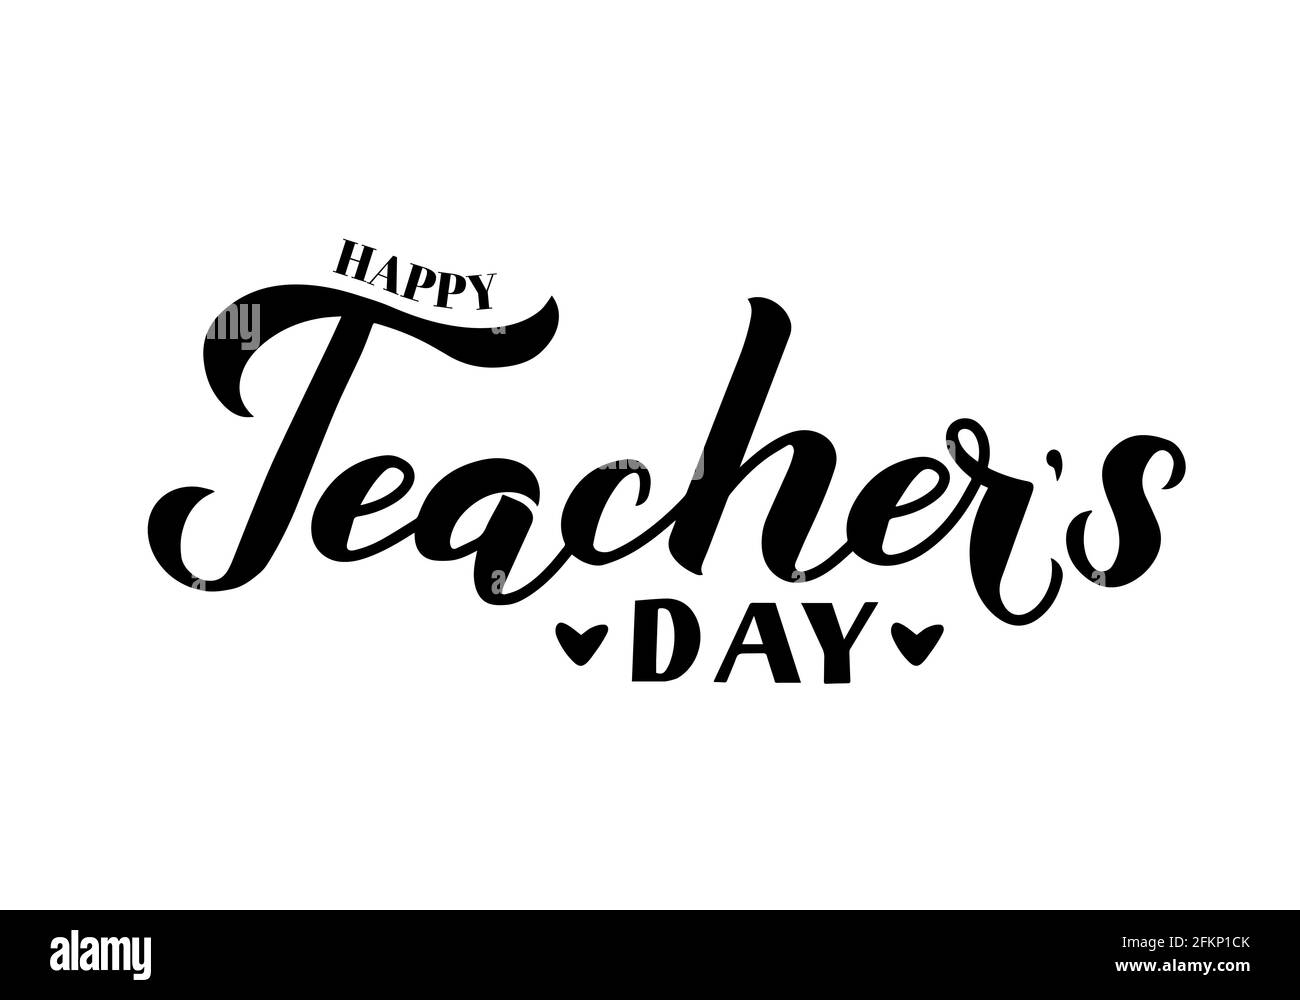 Happy Teachers Day calligraphy hand lettering isolated on white ...